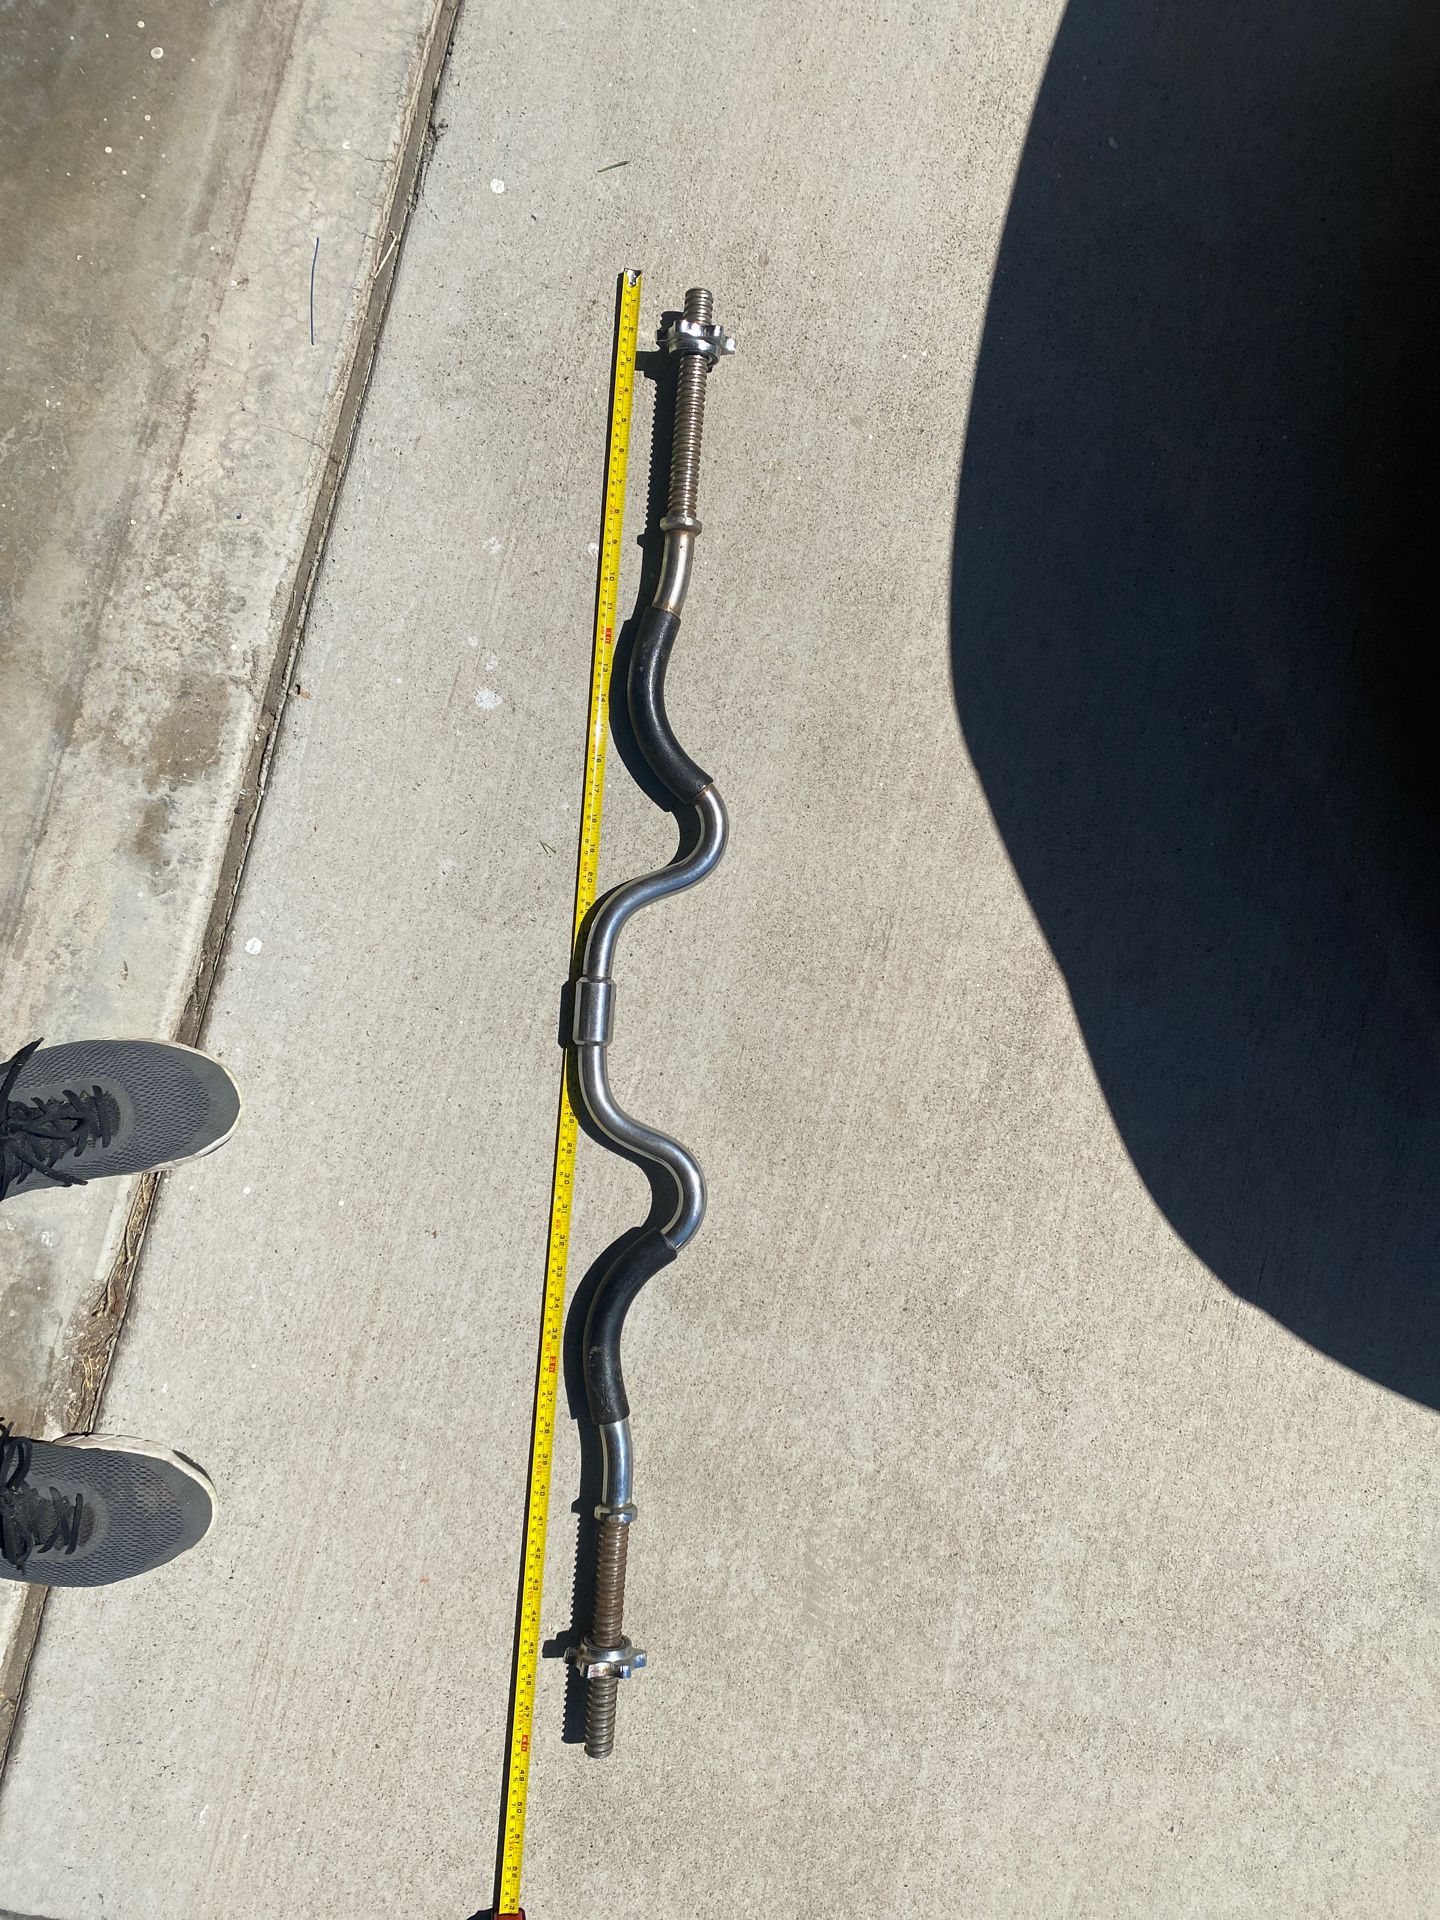 48” long curl bar ONLY (standard 1” , NOT OLYMPIC)